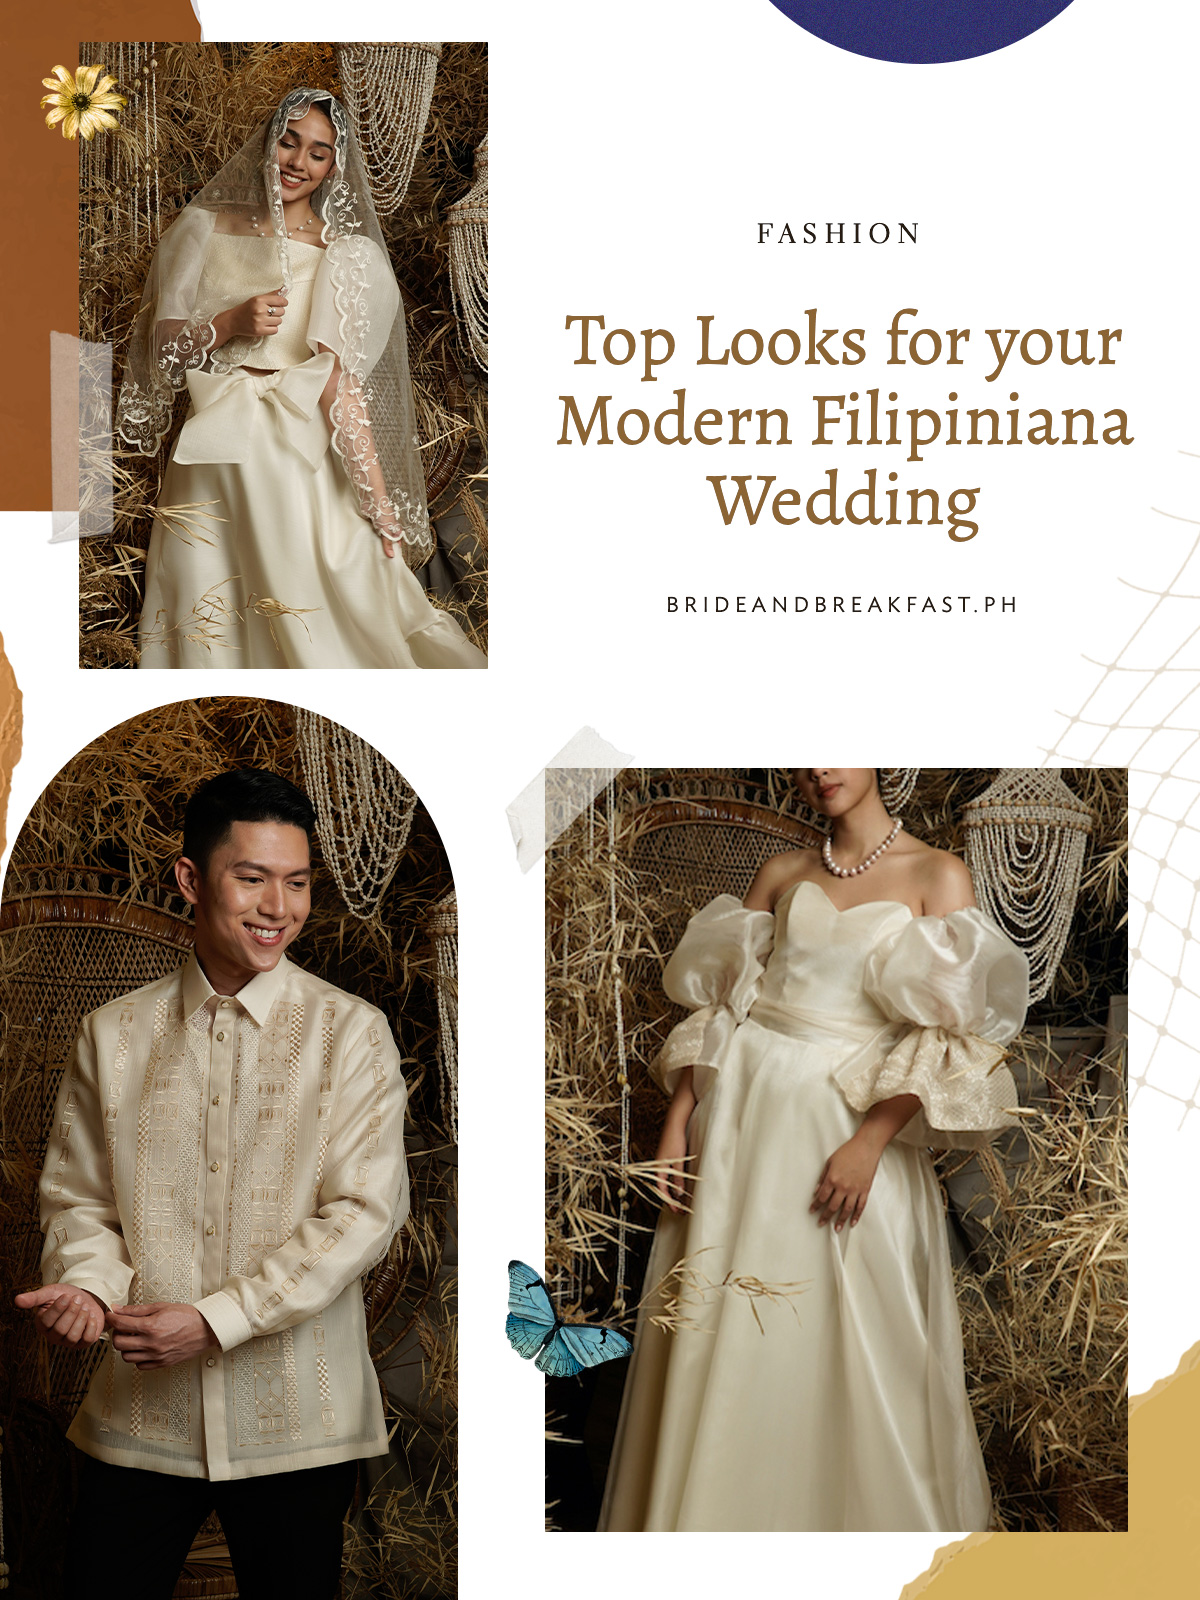 Top Looks for your Modern Filipiniana Wedding